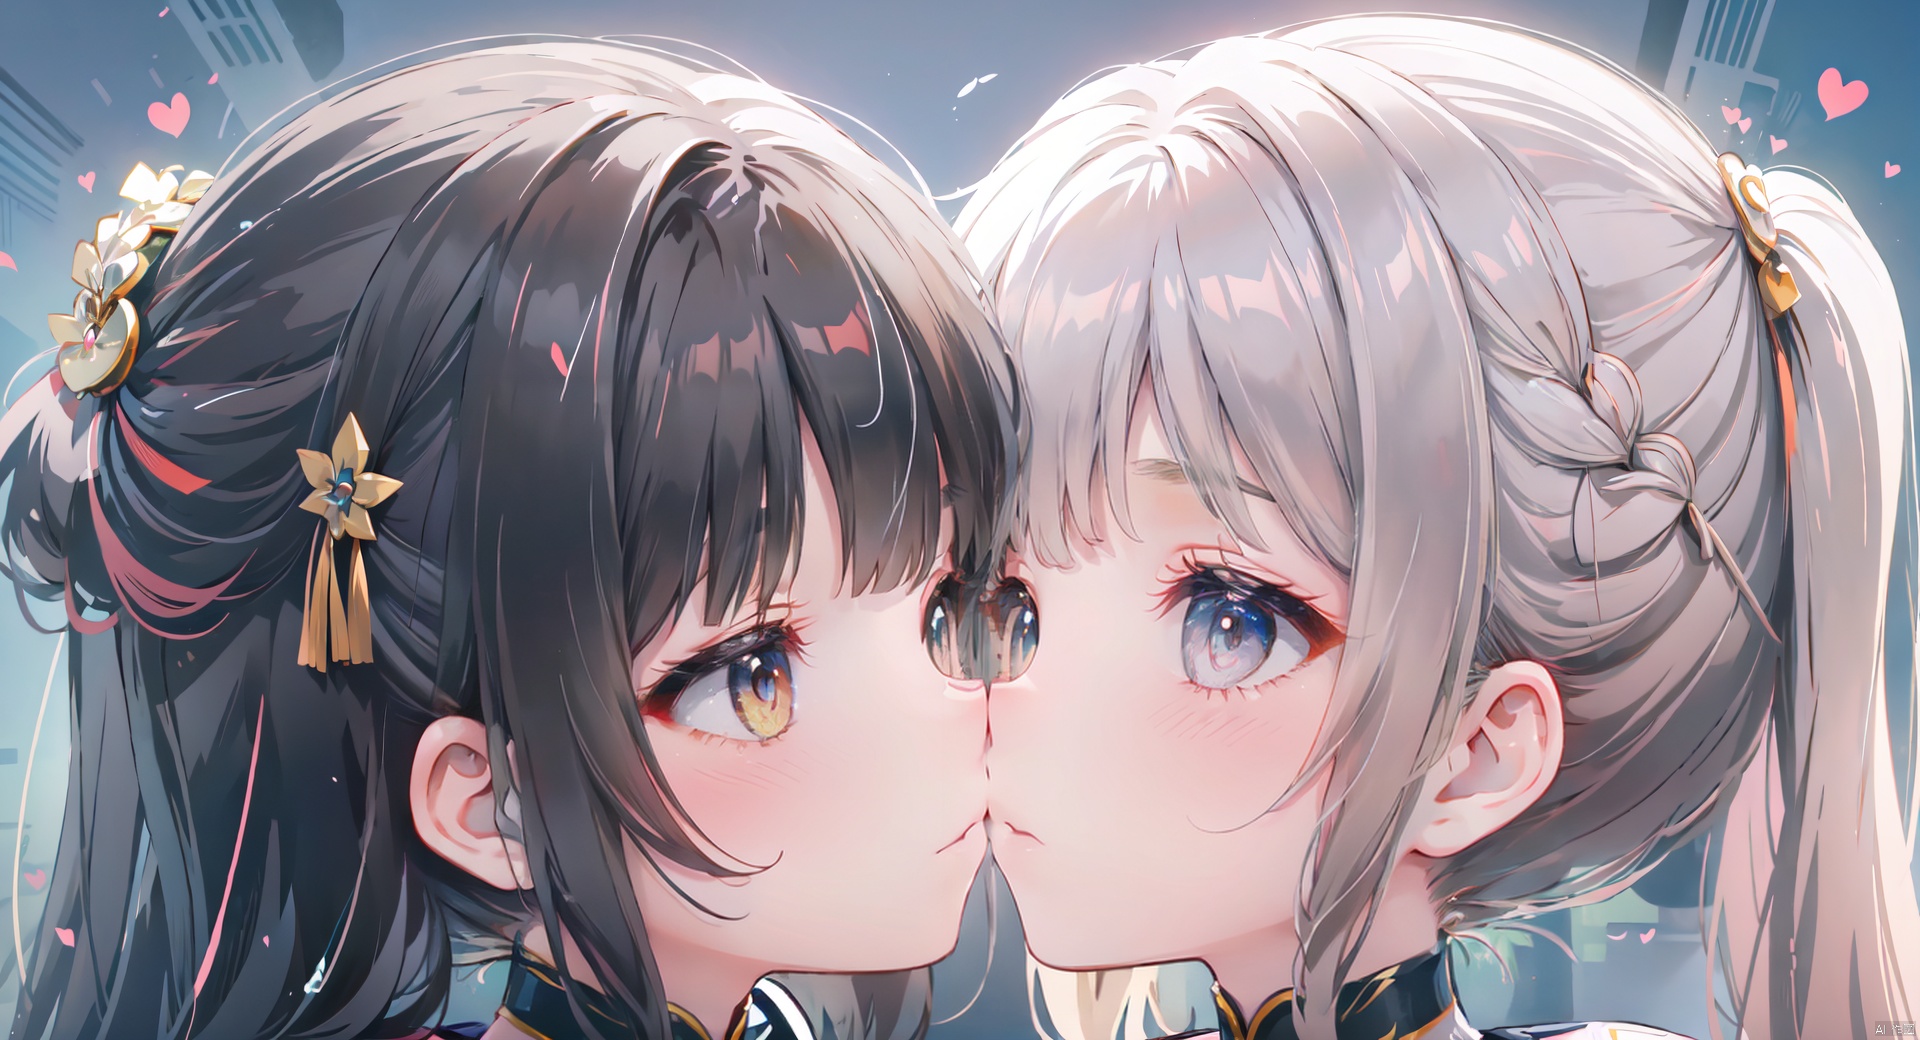 2 Girls, masterpiece, high quality, beautiful wallpaper, 16k, animation, illustration, positive view, perfect body, complete body, delicate face, delicate features, children, kissing, intense kiss, lesbian, loli, female primary school students, symmetrical_docking,